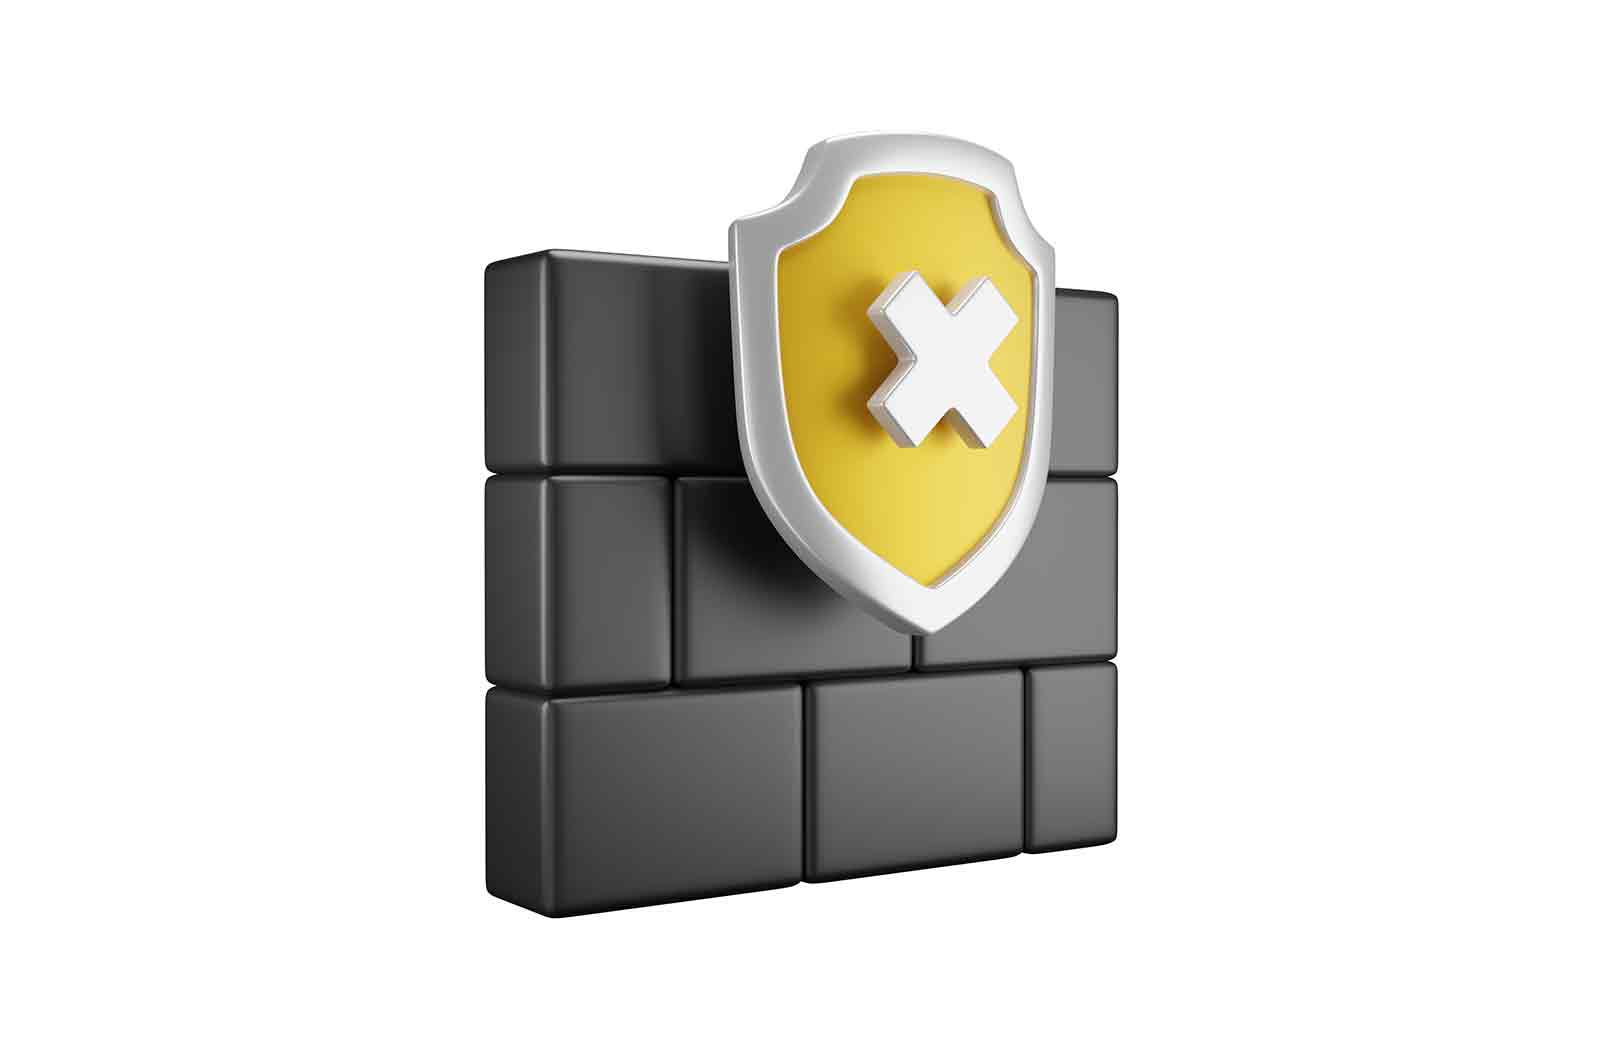 Firewall and shield with cross icon, digital protection 3d rendered illustration. Internet privacy cyber security or antivirus.